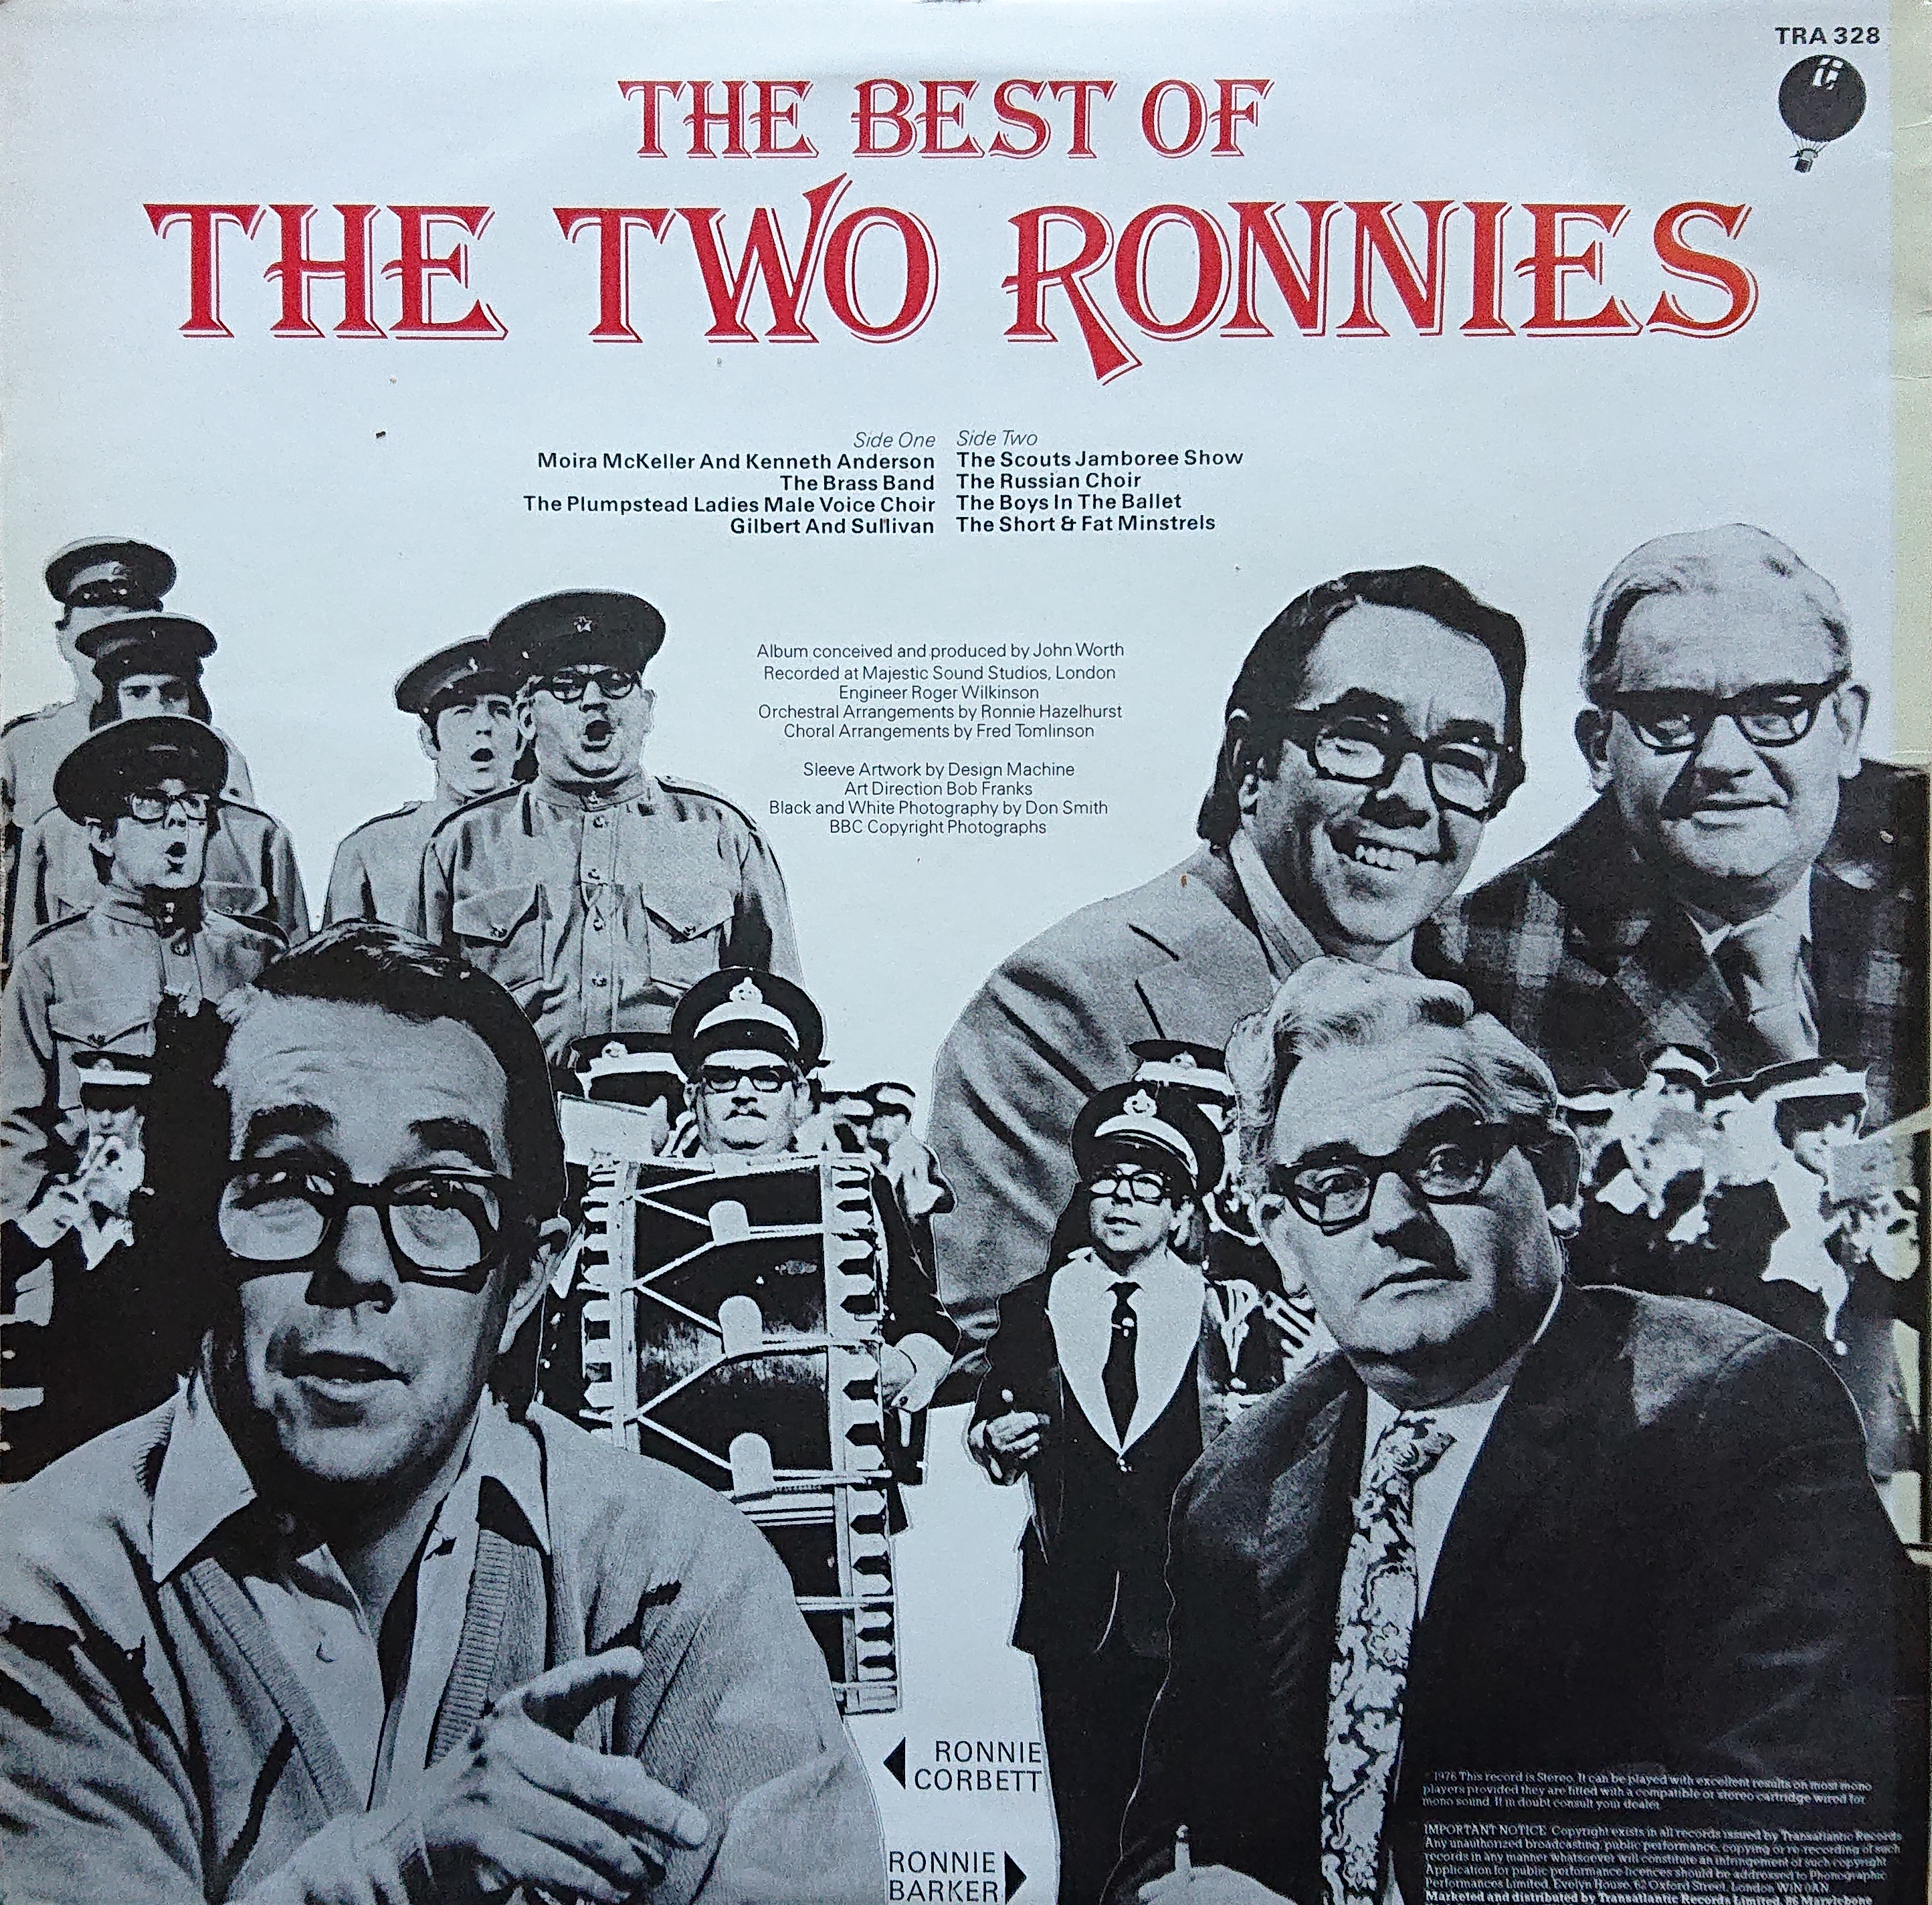 Picture of TRA 328 The best of the Two Ronnies by artist Barker / Vosburgh / Blackburn from the BBC records and Tapes library